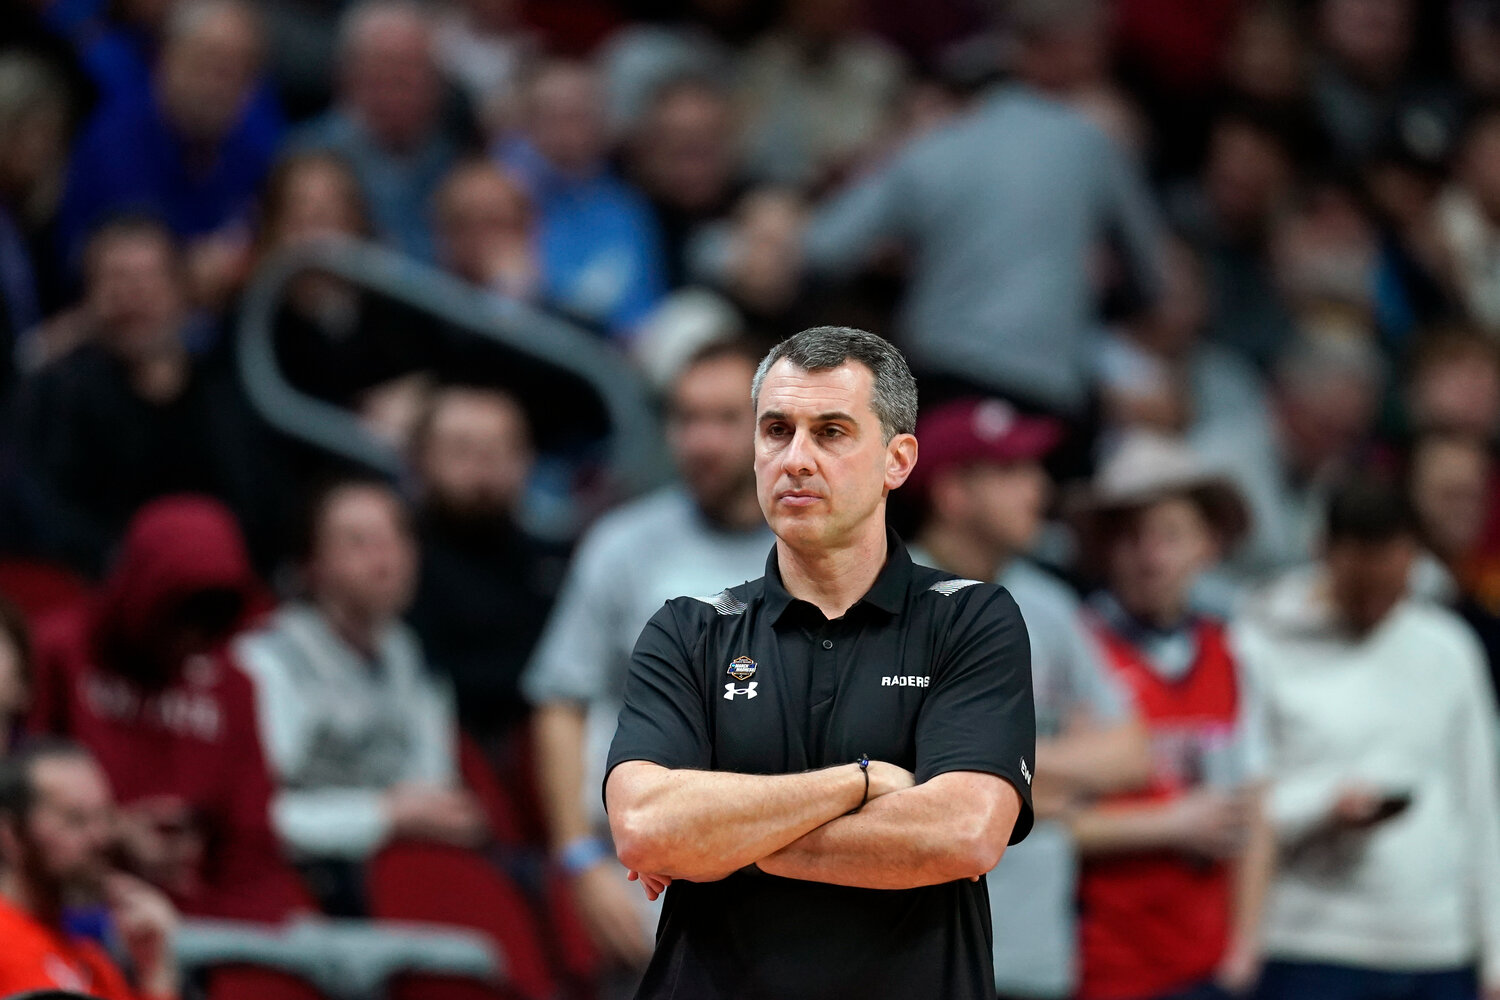 Colgate head coach Matt Langel watches from the bench in the first half of a first-round NCAA Tournament game against Texas on Thursday night in Des Moines, Iowa.